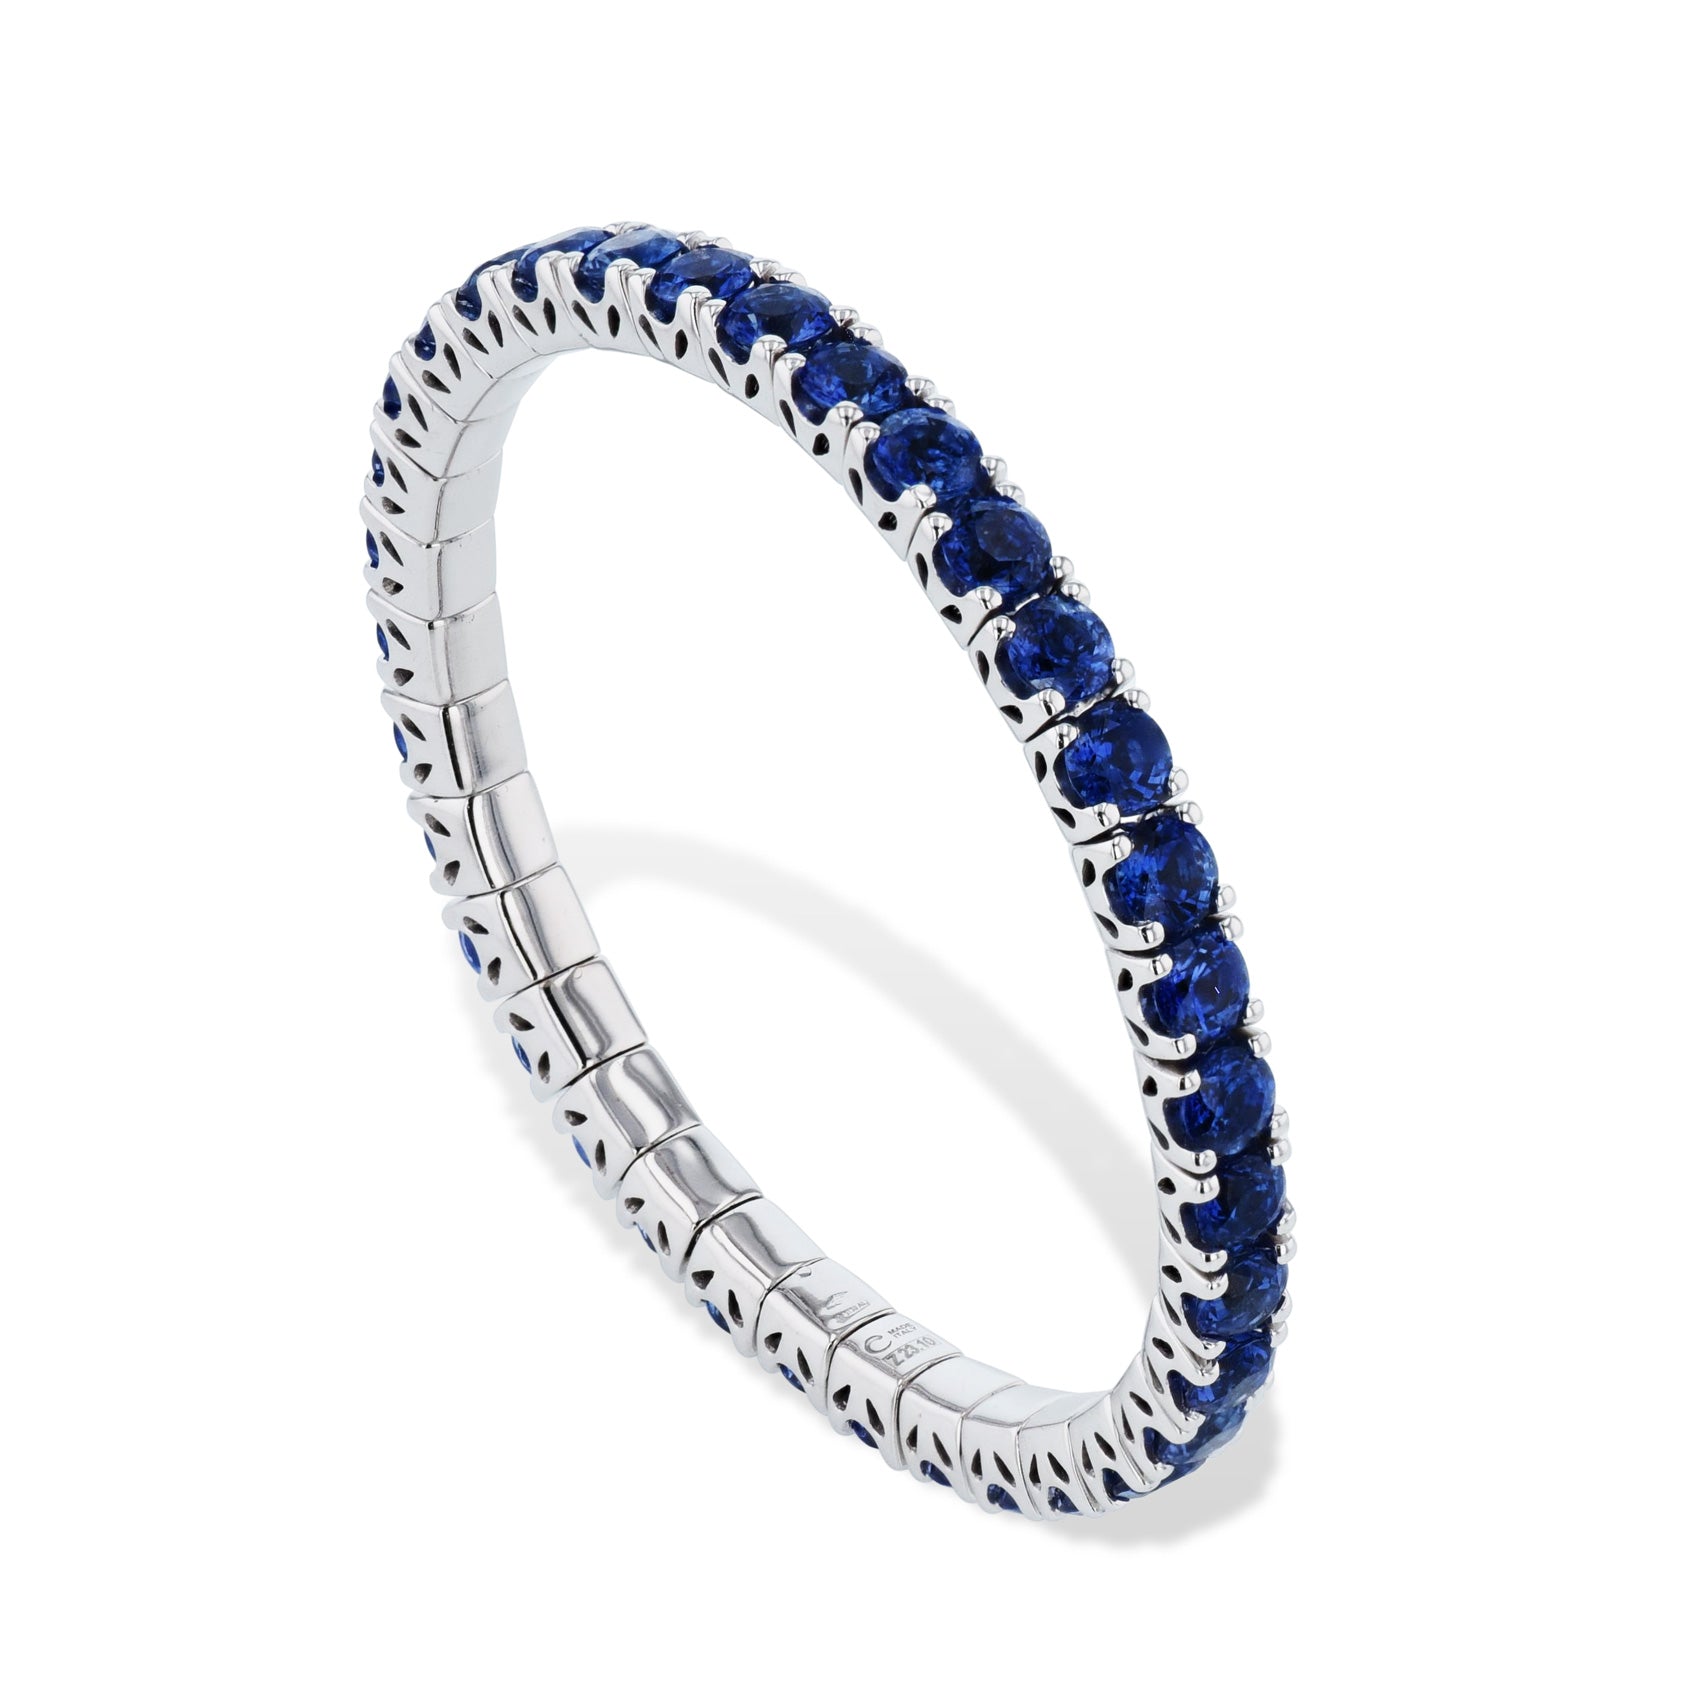 20.18ct Blue Sapphire White Gold Prong Set Tennis Bracelet Bracelets Curated by H